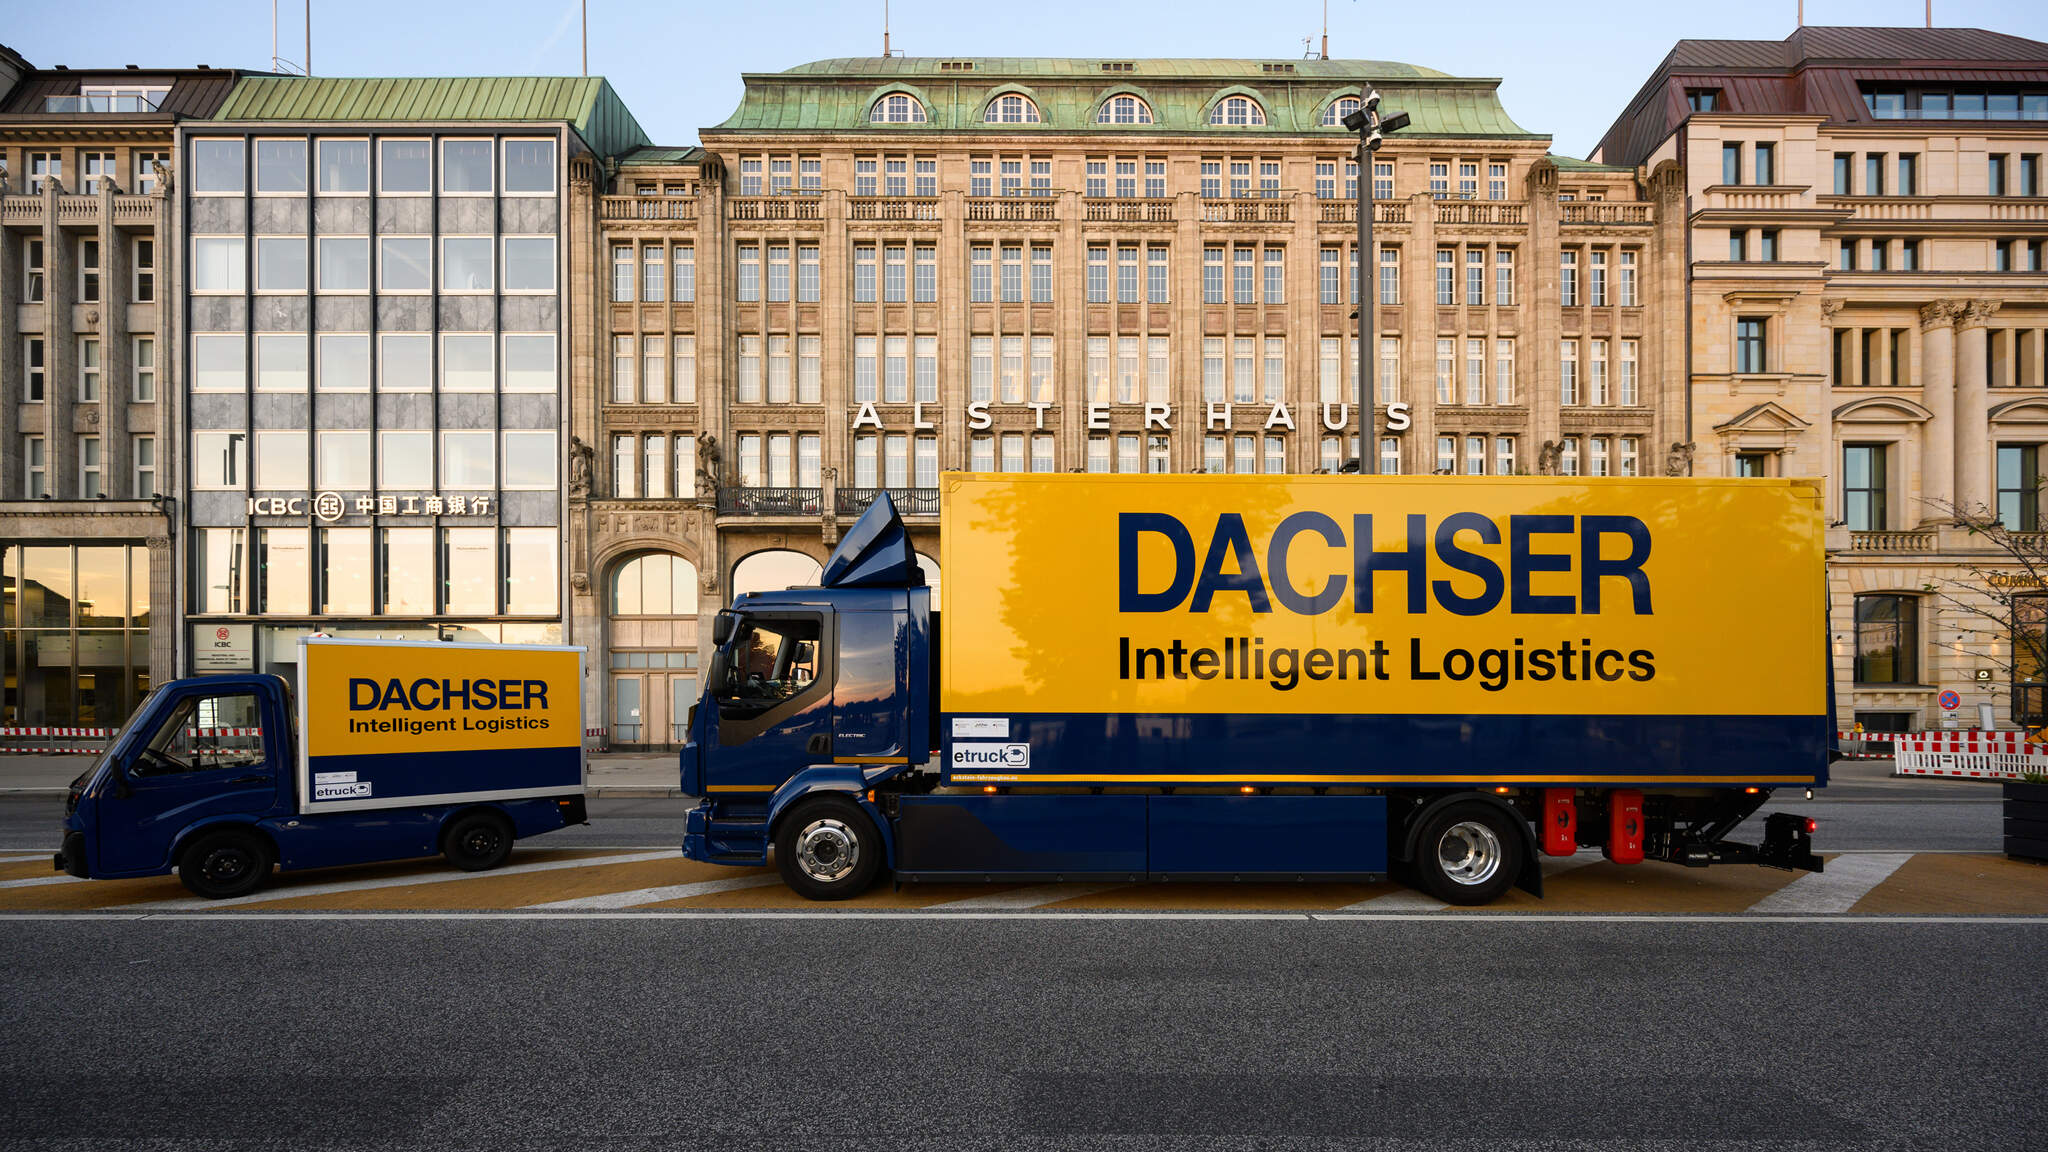 DACHSER Emission-Free Delivery uses electric vans and trucks as well as heavy-duty, electrically assisted cargo bikes to cover the “last mile” in defined downtown areas.